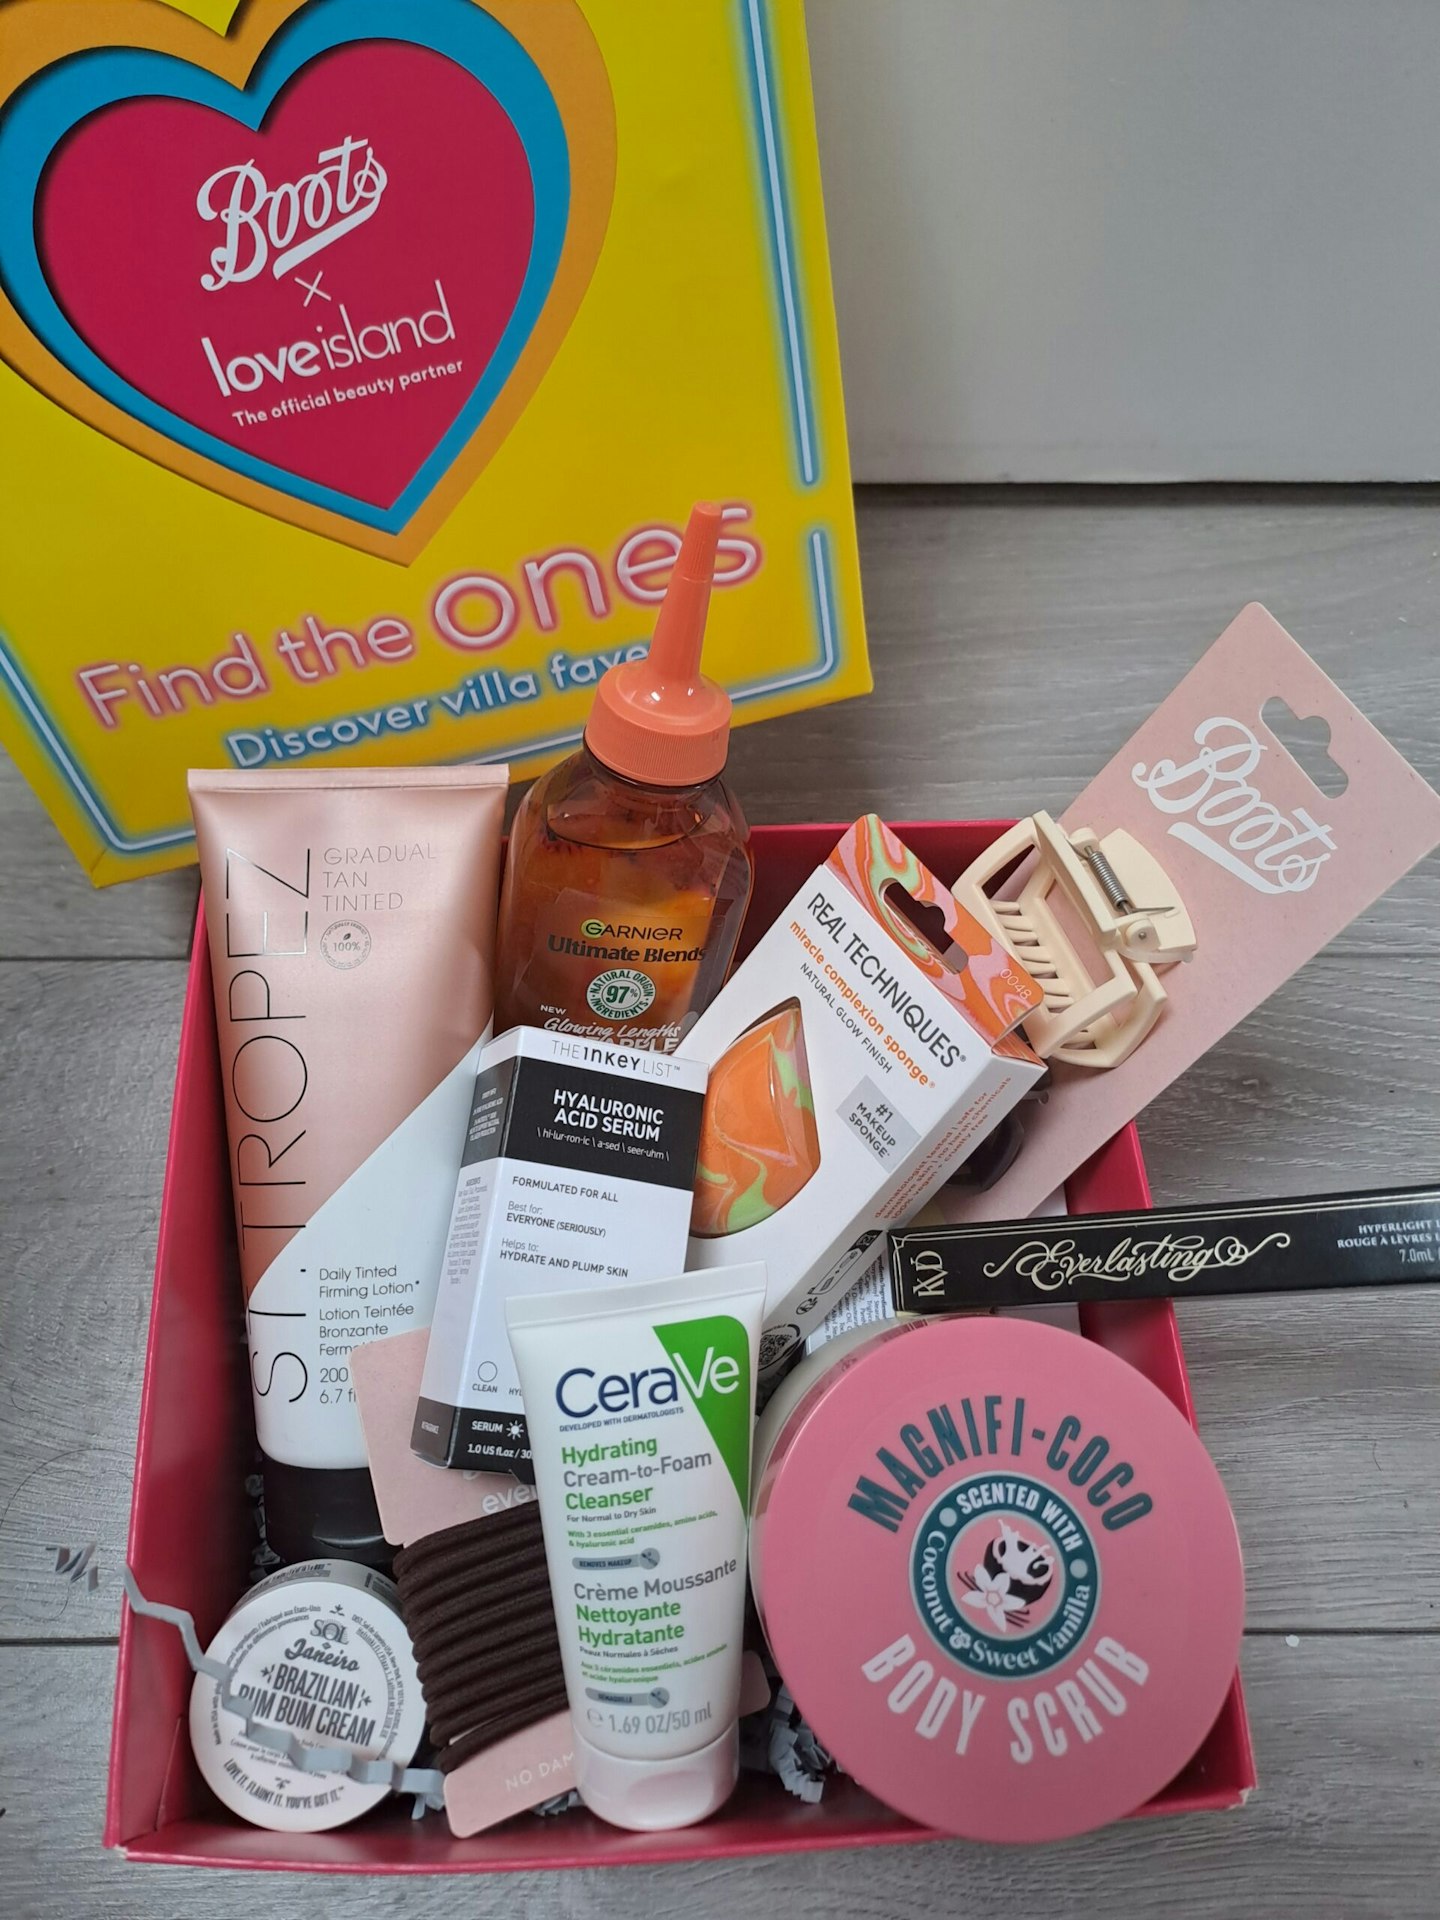 Boots X Love Island Beauty Box with products 